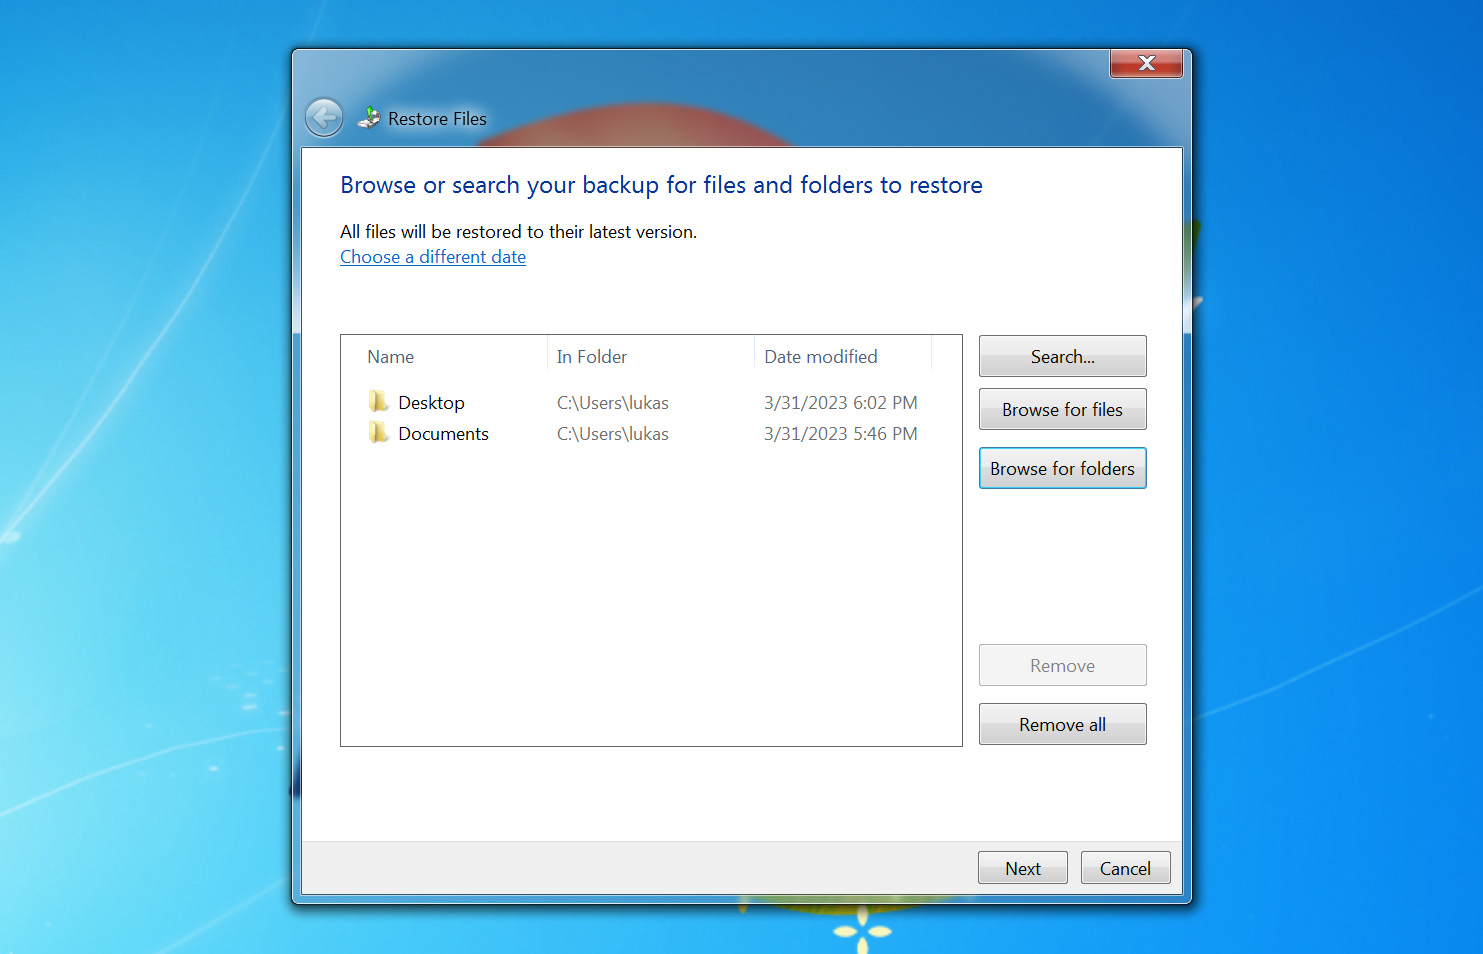 Visual representation of recovering deleted files from Recycle Bin on Windows 7 using the Windows Backup and Restore feature